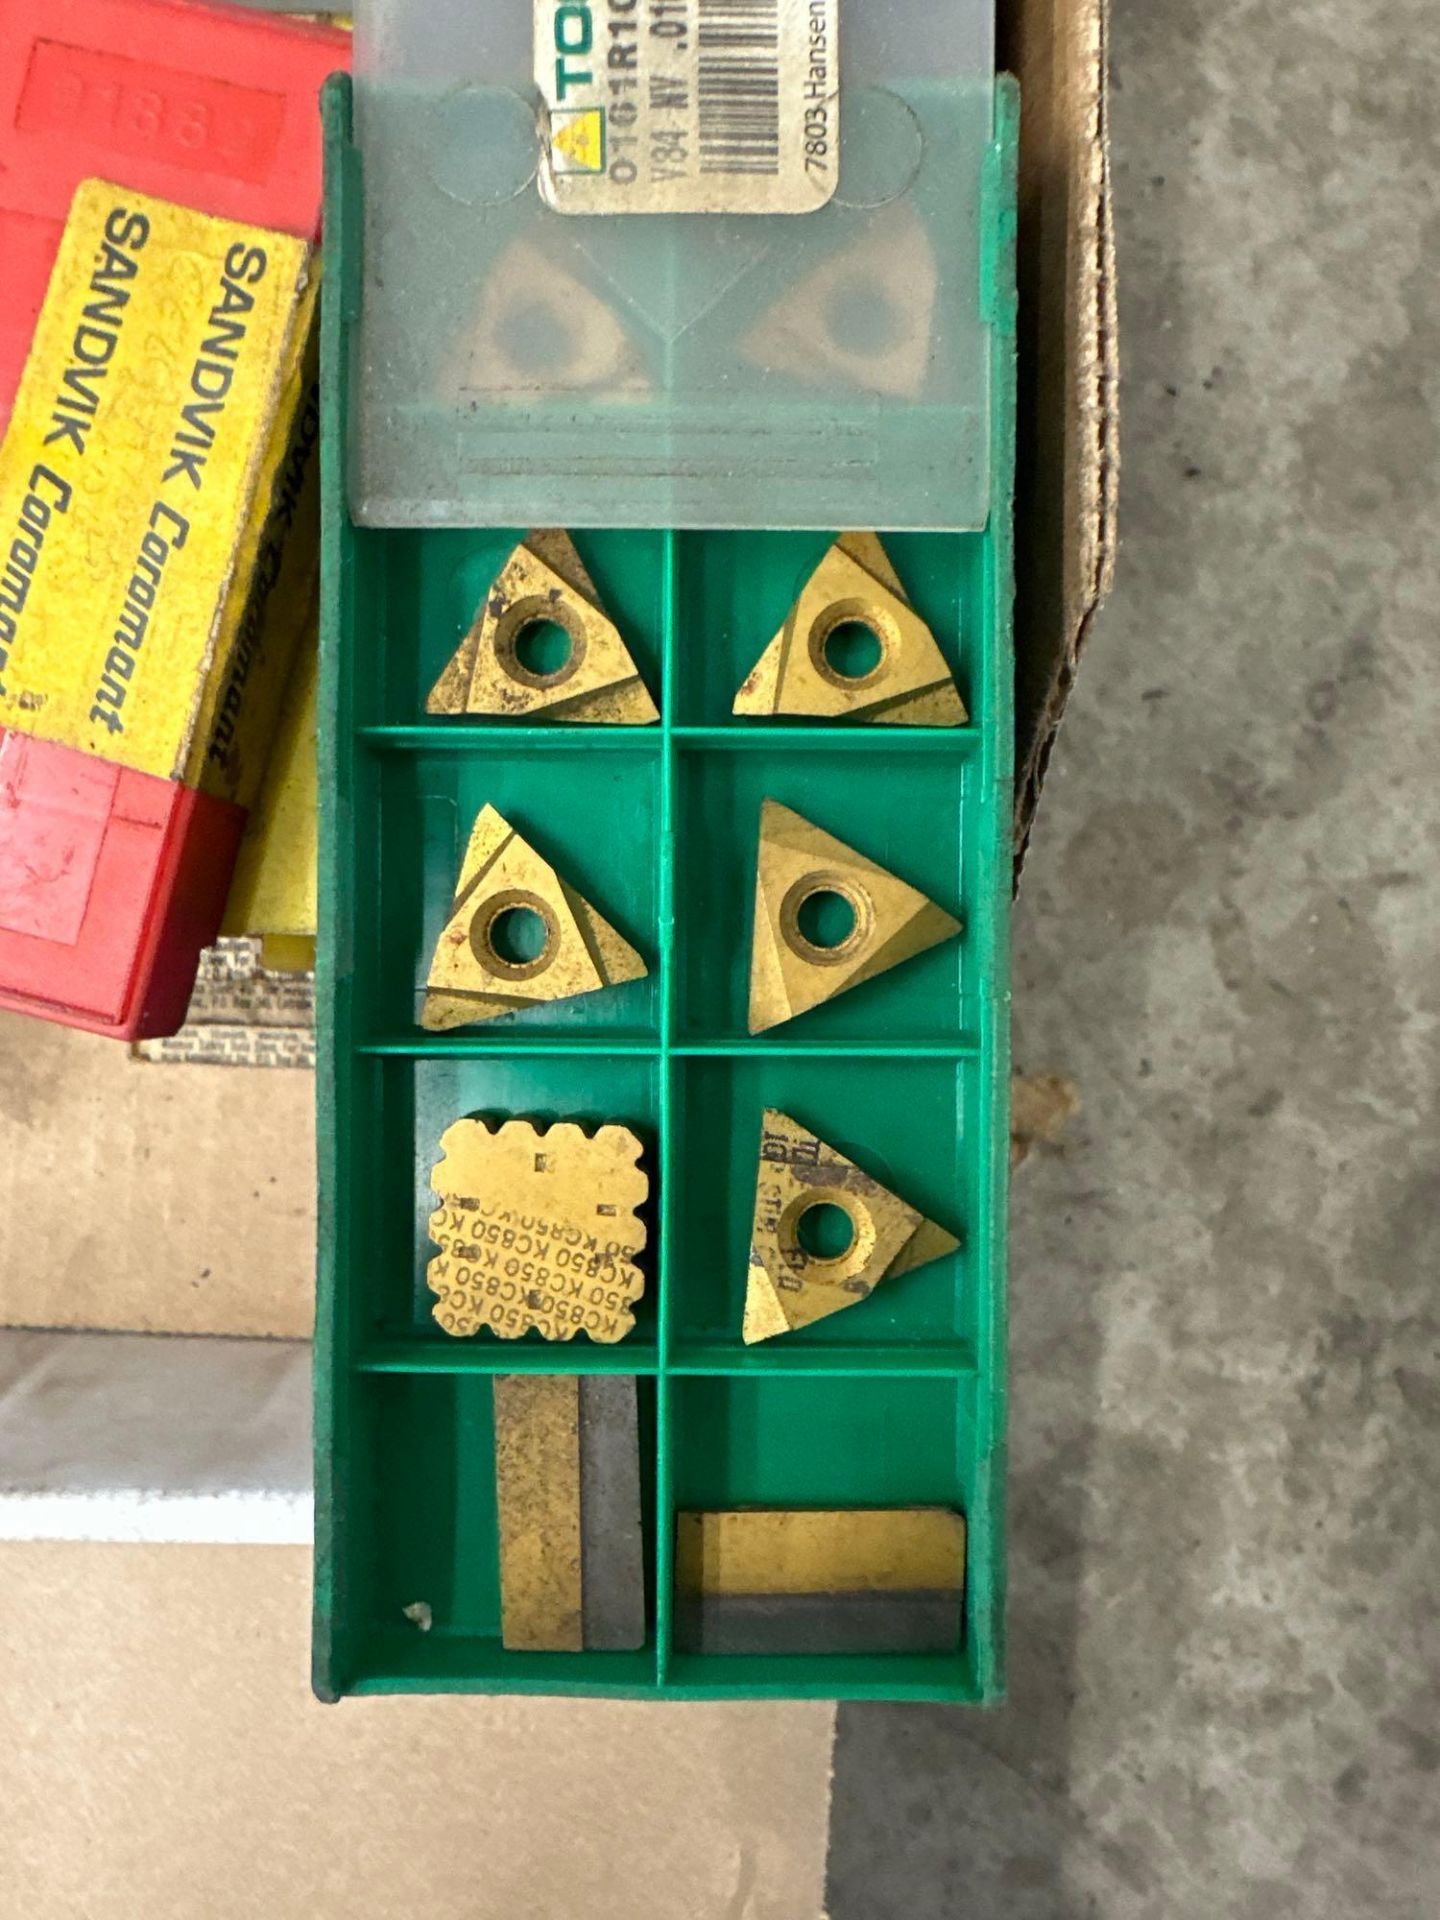 Lot of New Assorted Size and Shape Inserts: Carbide, Low Carbon Steel, Inconel and Different Grades - Image 9 of 18